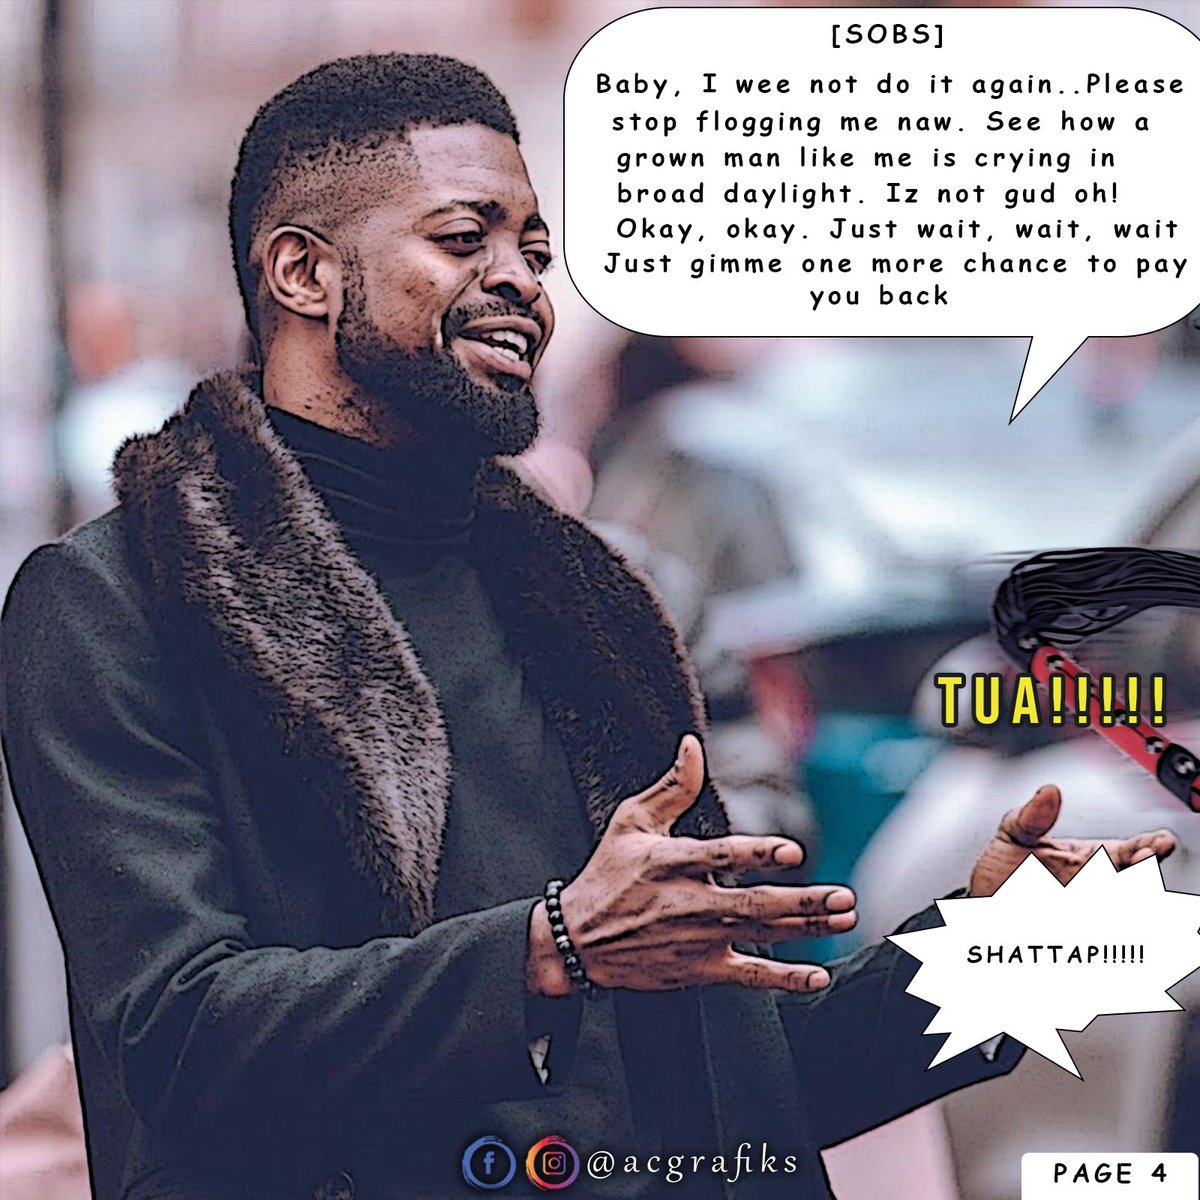 Stick to this threadSlide  and Read till the end. MANIPULATION SERIES: CELEBRITY HANGOUT SEASON FINALE feat.  @basket_mouth  @officialBovi  @cuppymusic"WHEN COMIC BOOK MEETS COMIC RELIEF" #ACeRChap  #ManipulationSeries